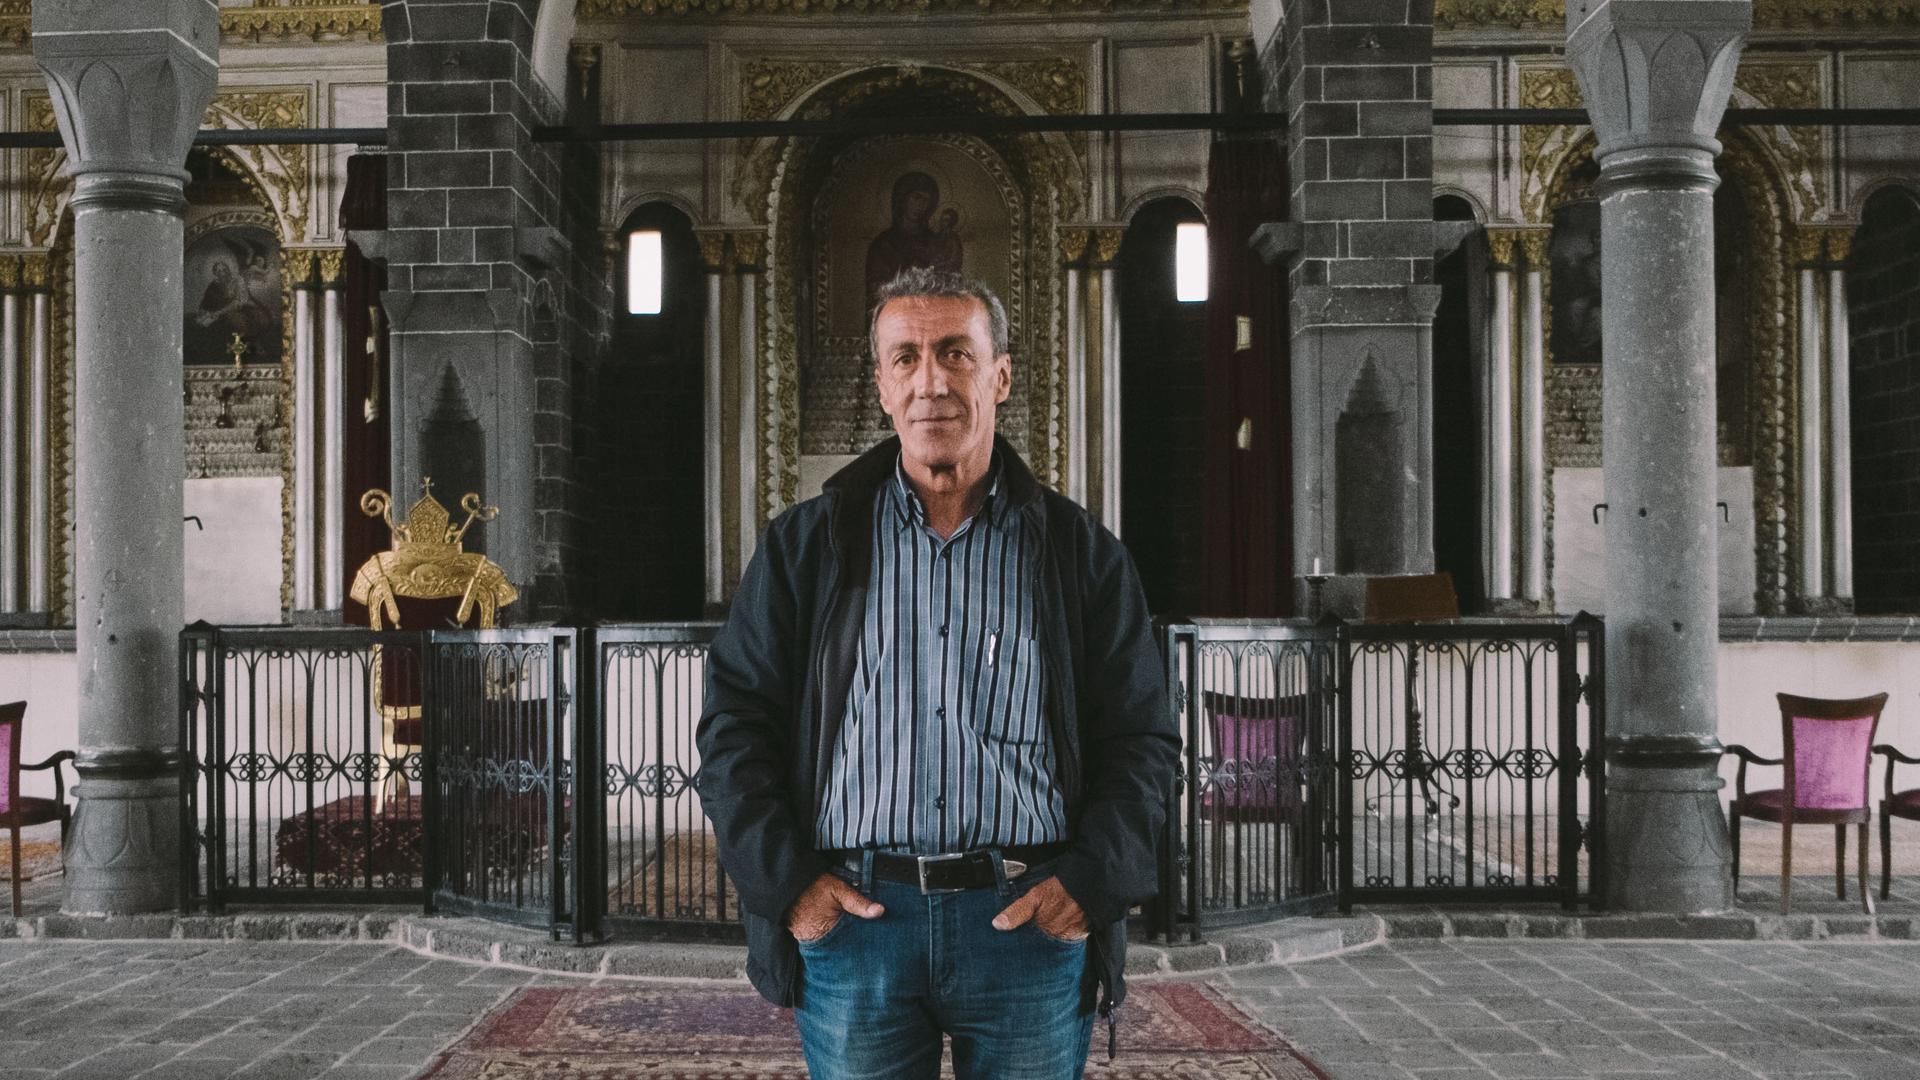 Armen Demircian says he's found a home at this recently restored Armenian Church in Diyarbakir, Turkey — though he's not a Christian.